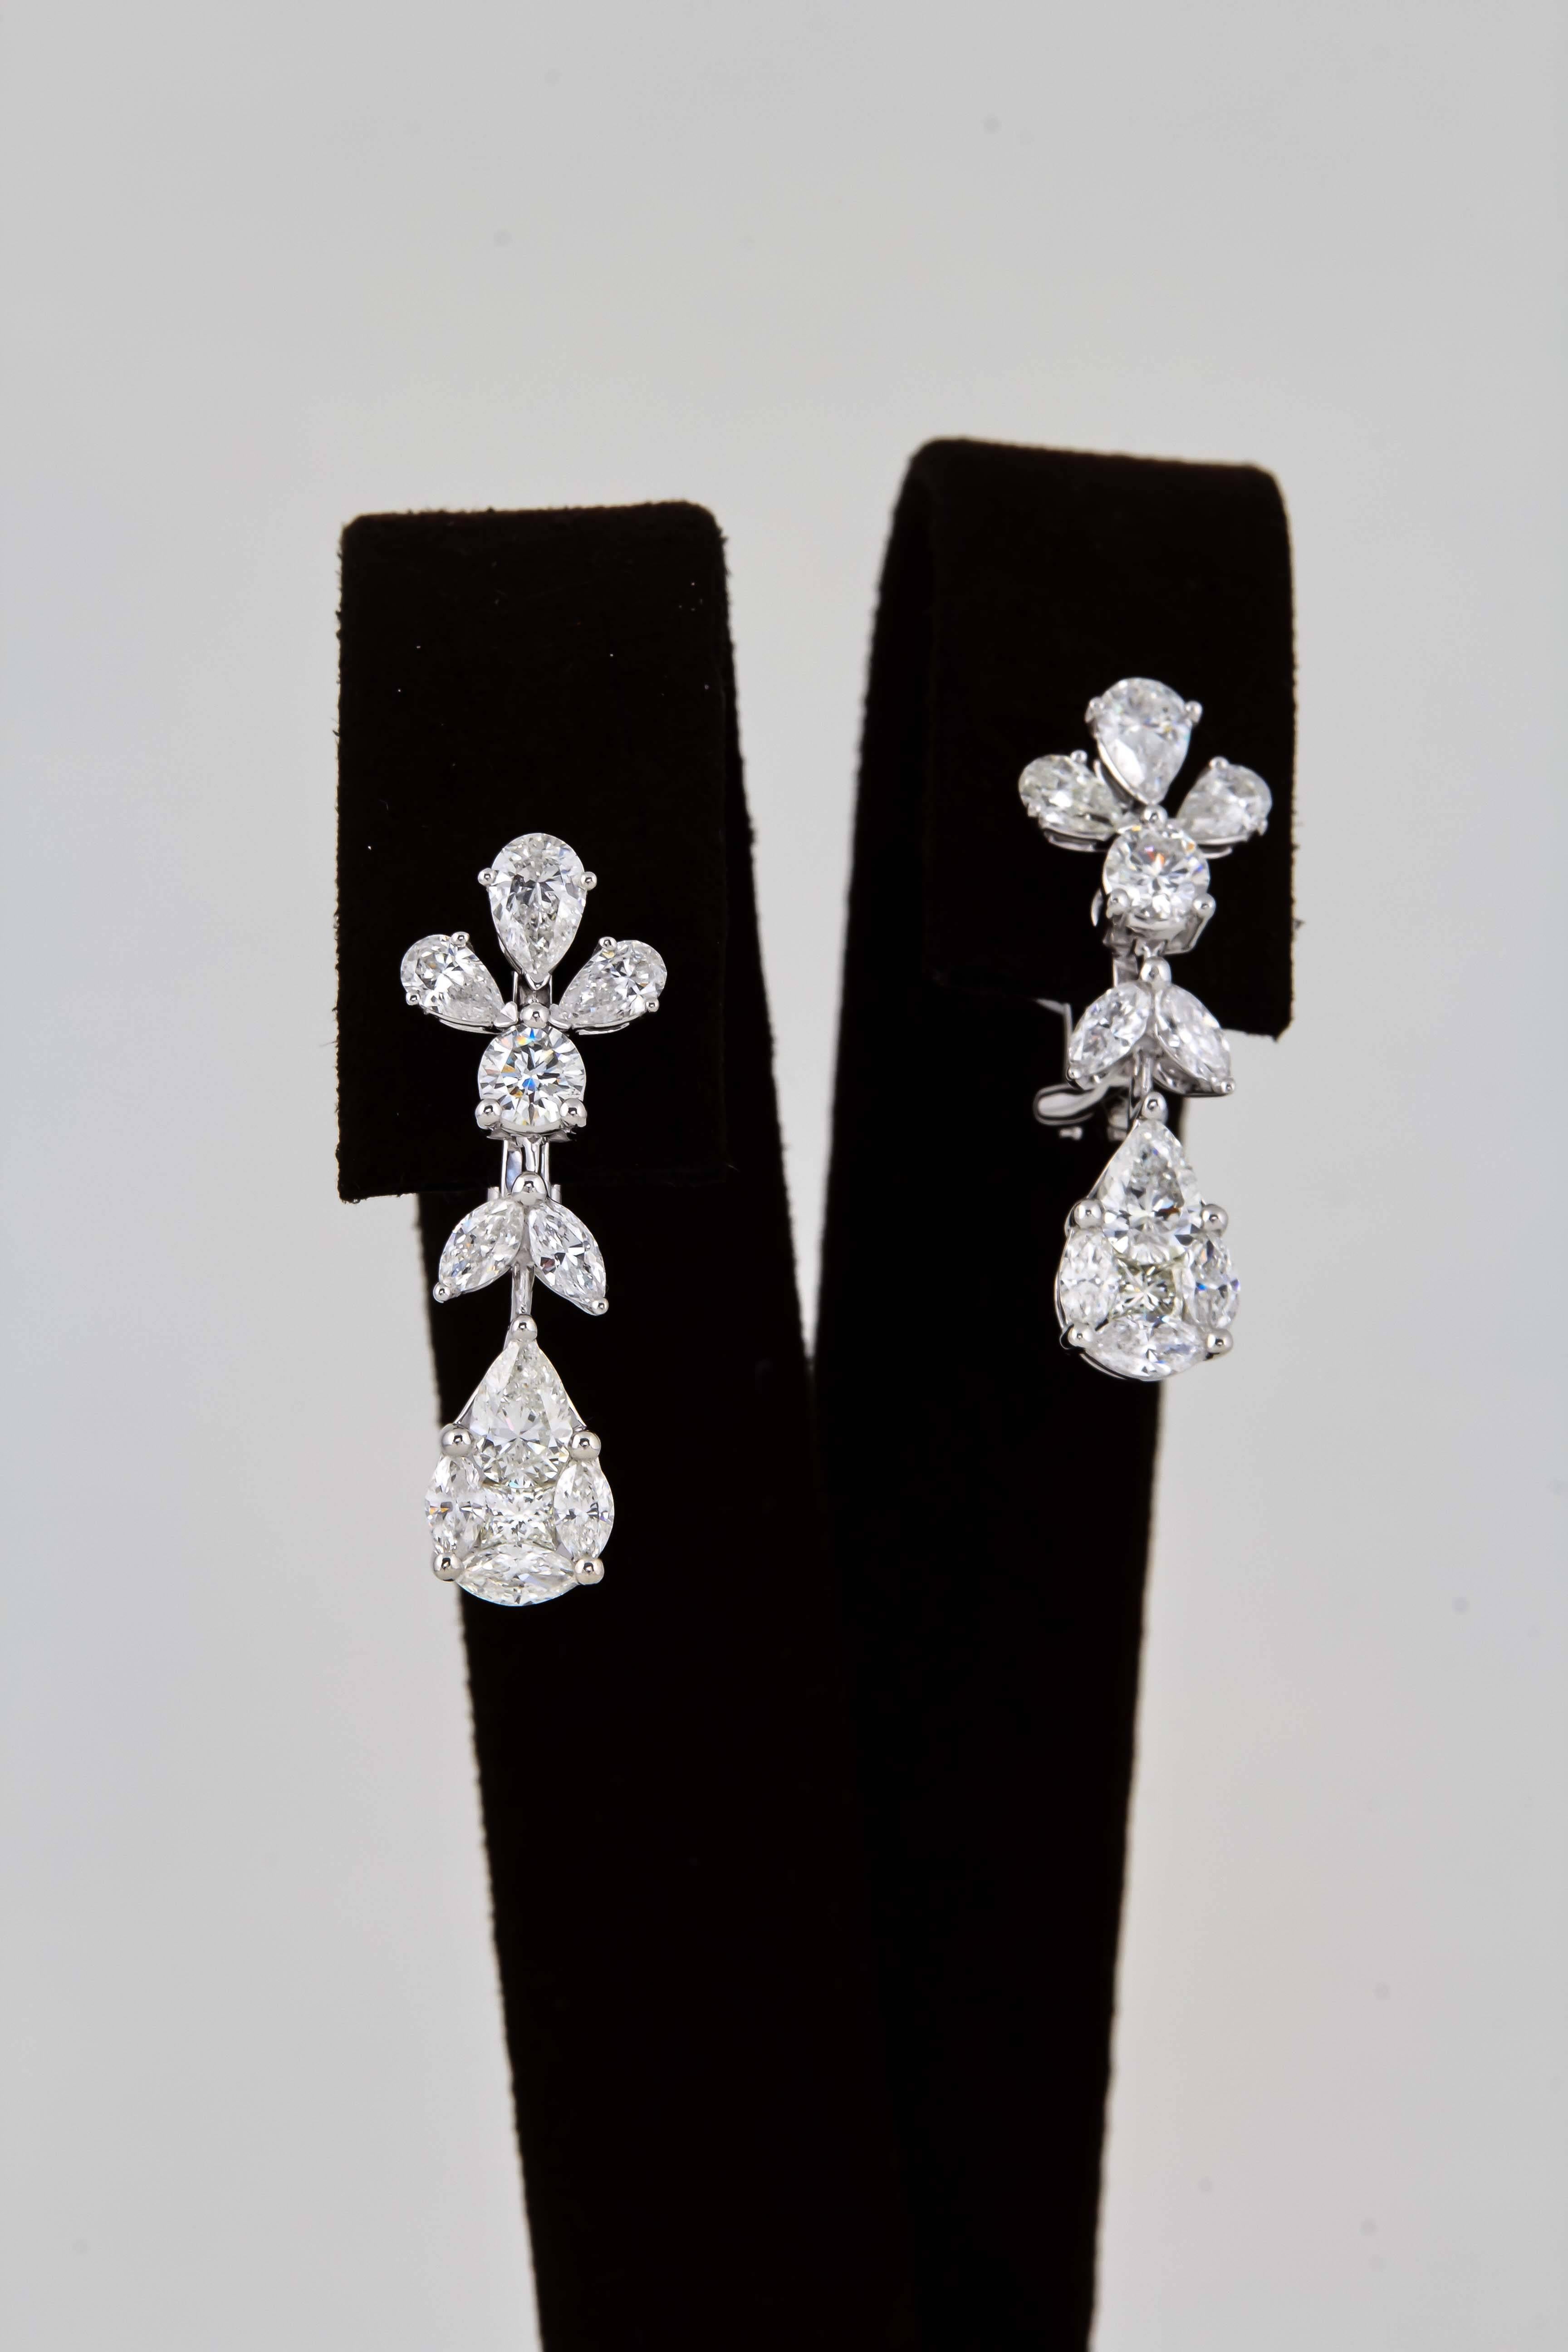 
A stunning pear of earrings in a timeless design.

3.41 carats of pear, marquise, round and special cut diamonds. 

F/G in color VS clarity set in 18k white gold. 

The pear shape drop is an illusion made up of a number of special cut diamonds. The